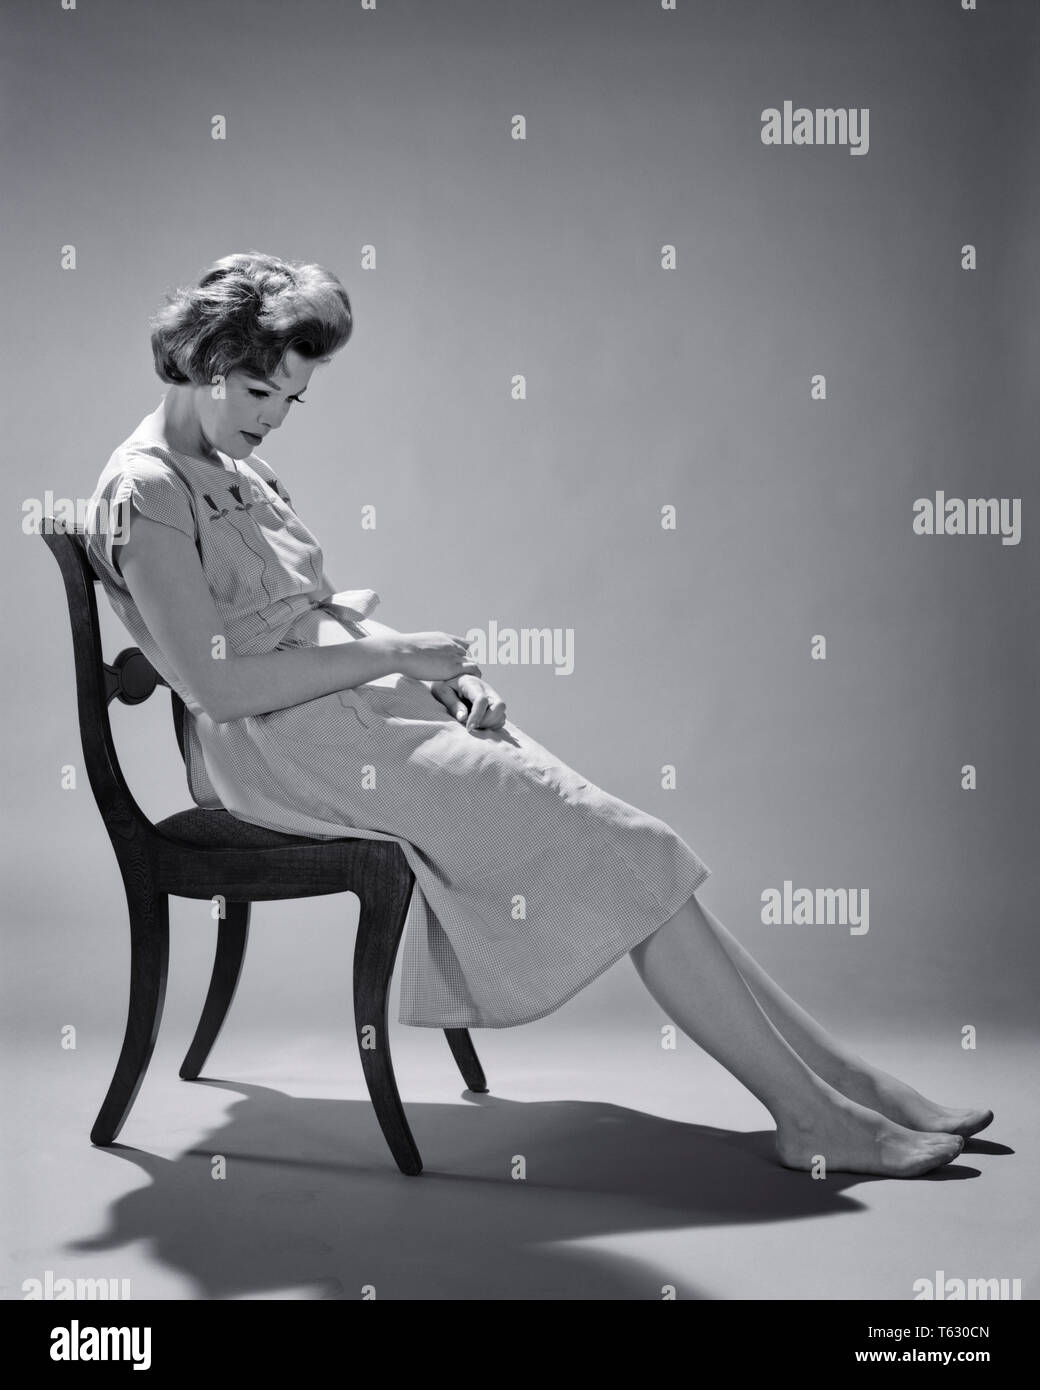 1960s EXHAUSTED DEPRESSED WOMAN SLUMPED SITTING ON CHAIR NOT WEARING SHOES - s11680 HAR001 HARS NERVOUS EXPRESSIONS TROUBLED B&W SADNESS HEALTHCARE HOMEMAKER ANXIETY HOMEMAKERS PREVENTION HEALING DIAGNOSIS DESPAIR NOT HEALTH CARE HOUSEWIVES IMPAIRMENT MOOD SLUMPED TREATMENT MENTAL HEALTH CONCEPTUAL GLUM TENSION MID-ADULT MID-ADULT WOMAN MISERABLE YOUNG ADULT WOMAN BLACK AND WHITE CAUCASIAN ETHNICITY DISEASE HAR001 MENTAL ILLNESS OLD FASHIONED Stock Photo